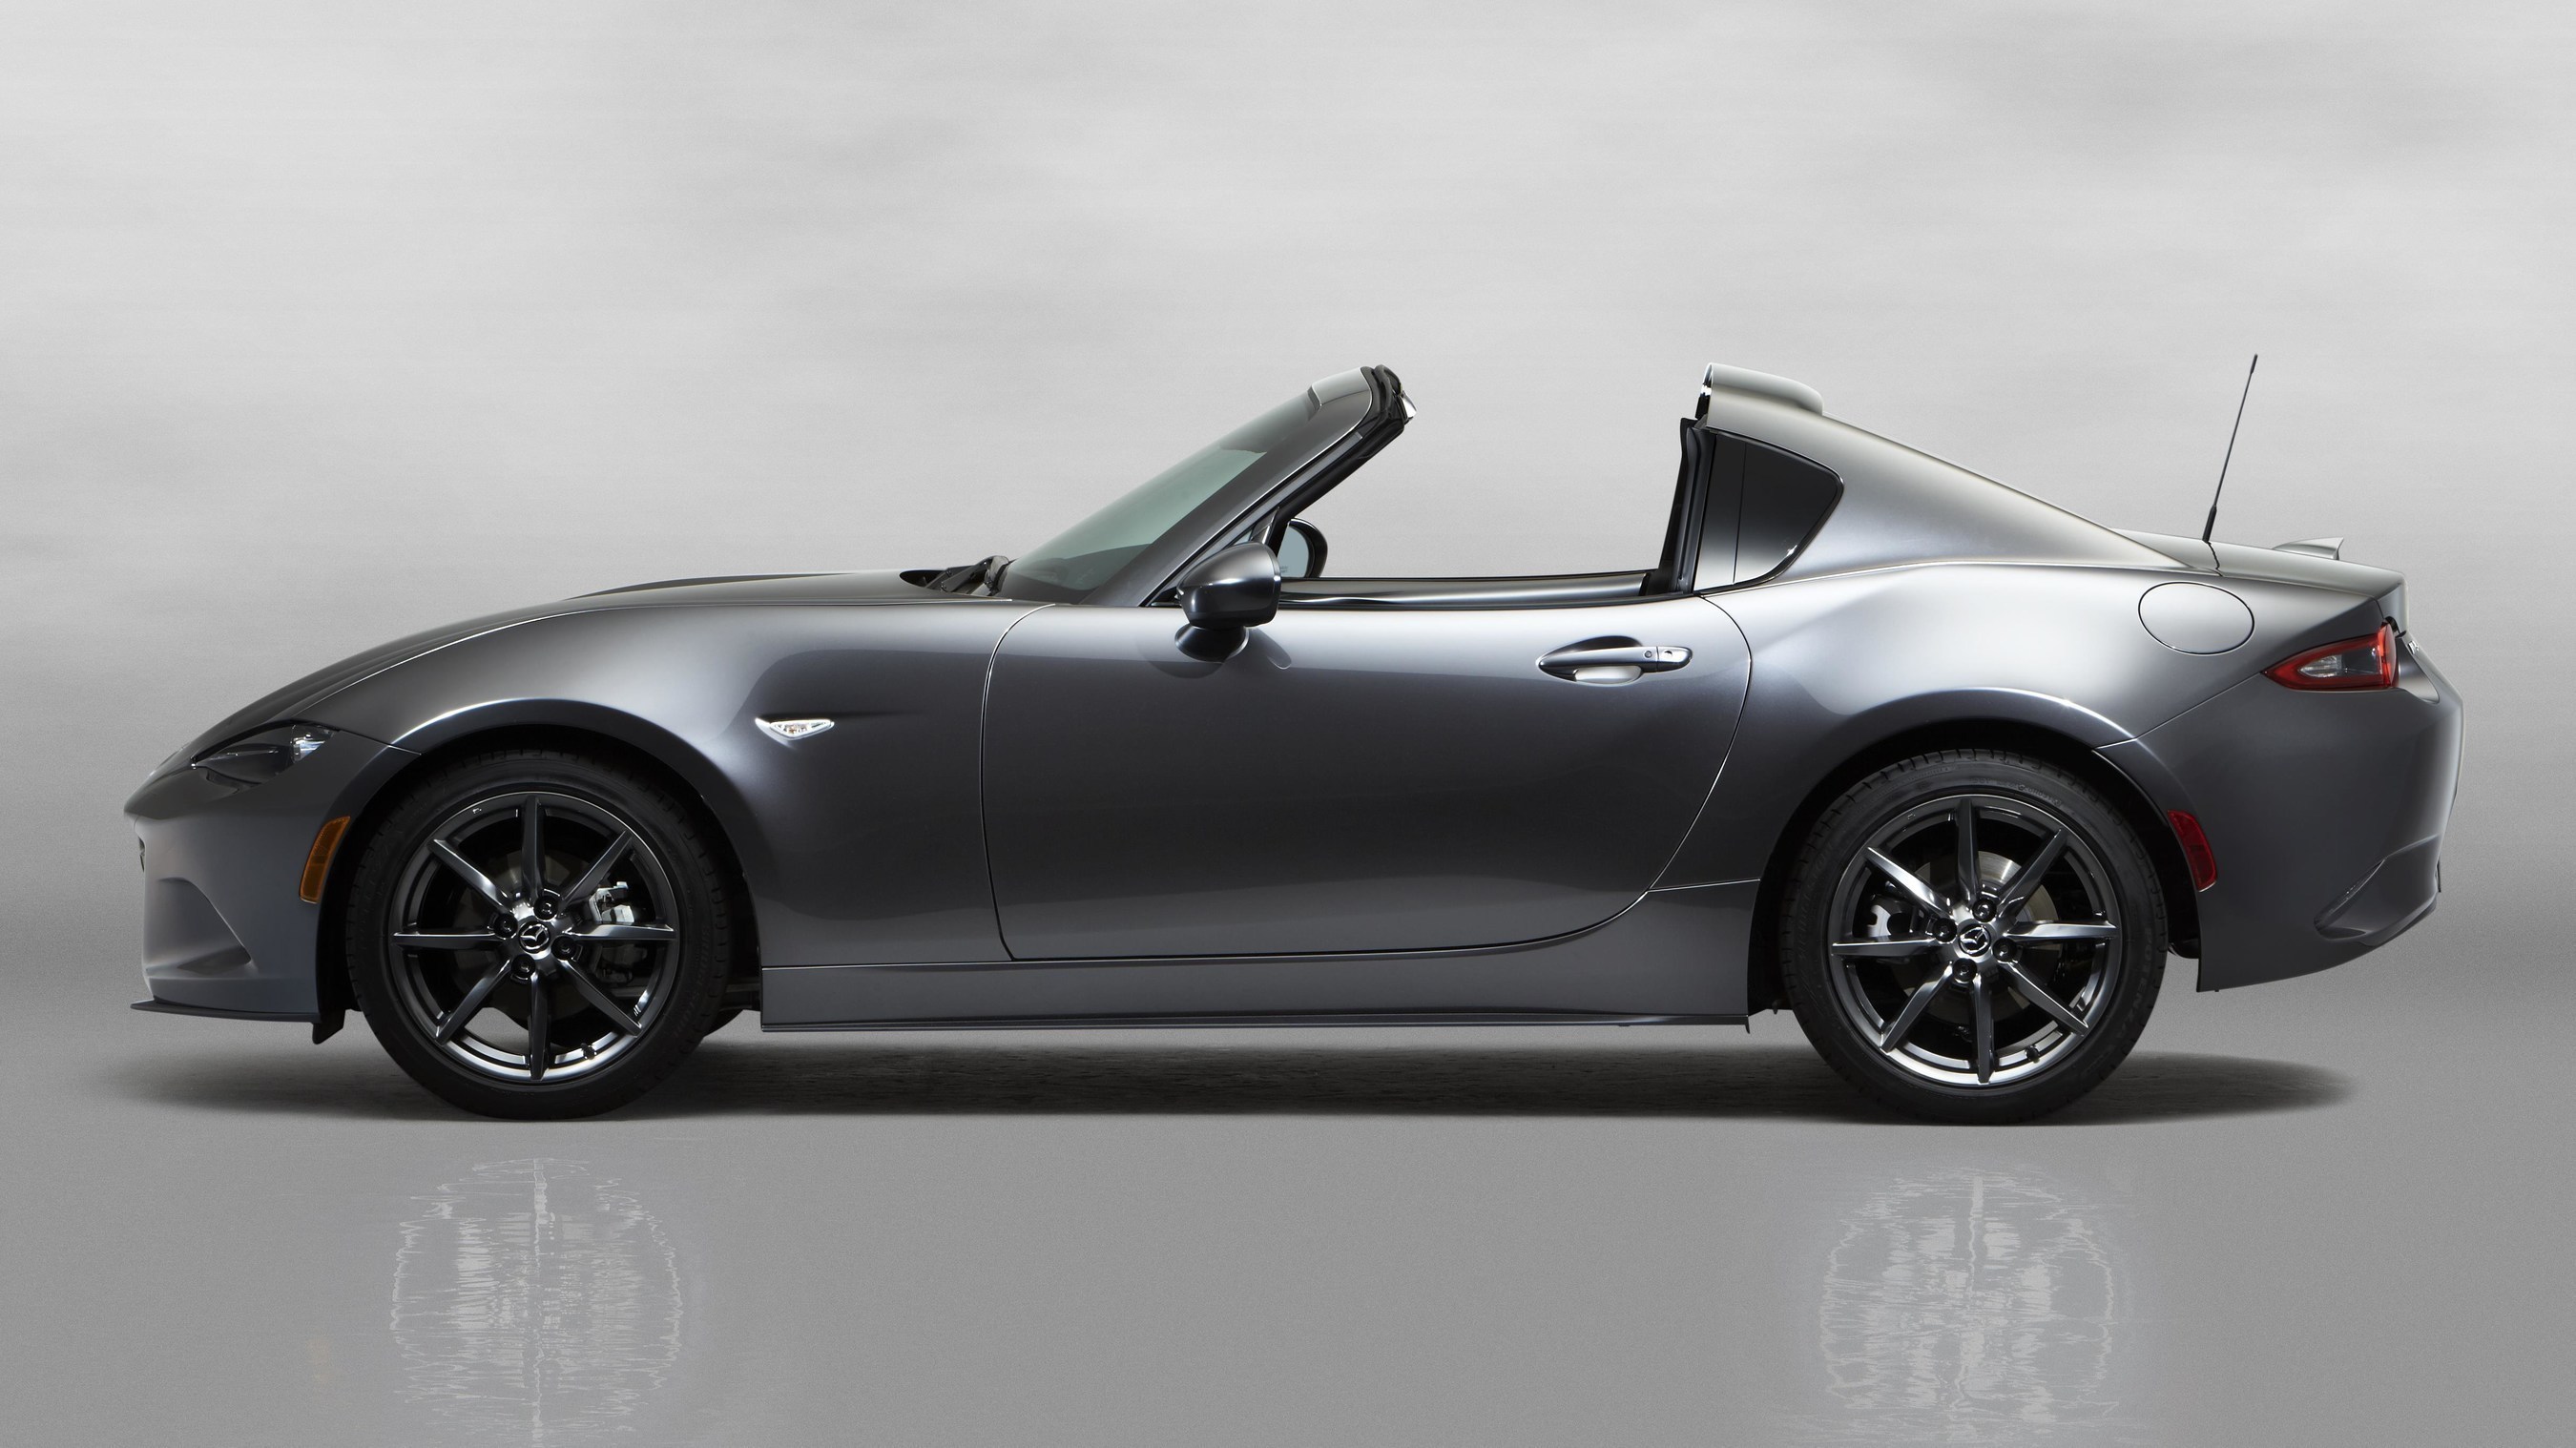 2017 Mazda MX-5 Miata RF Launch Edition Preordering Begins Today to Start from $33,850